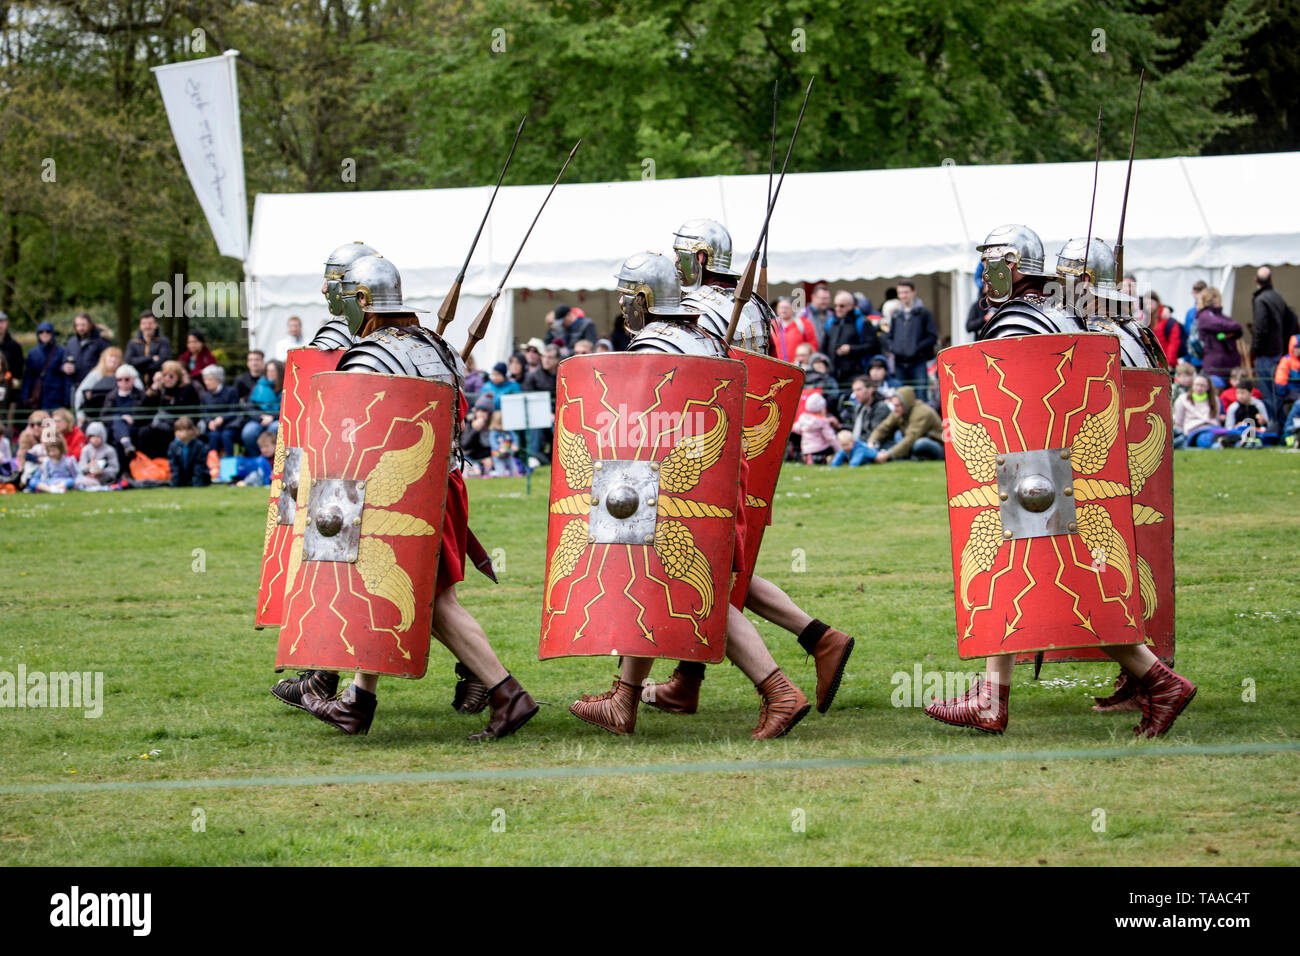 Ermine Street Guard show Imperial Roman Army at Wrest Park, England Stock Photo